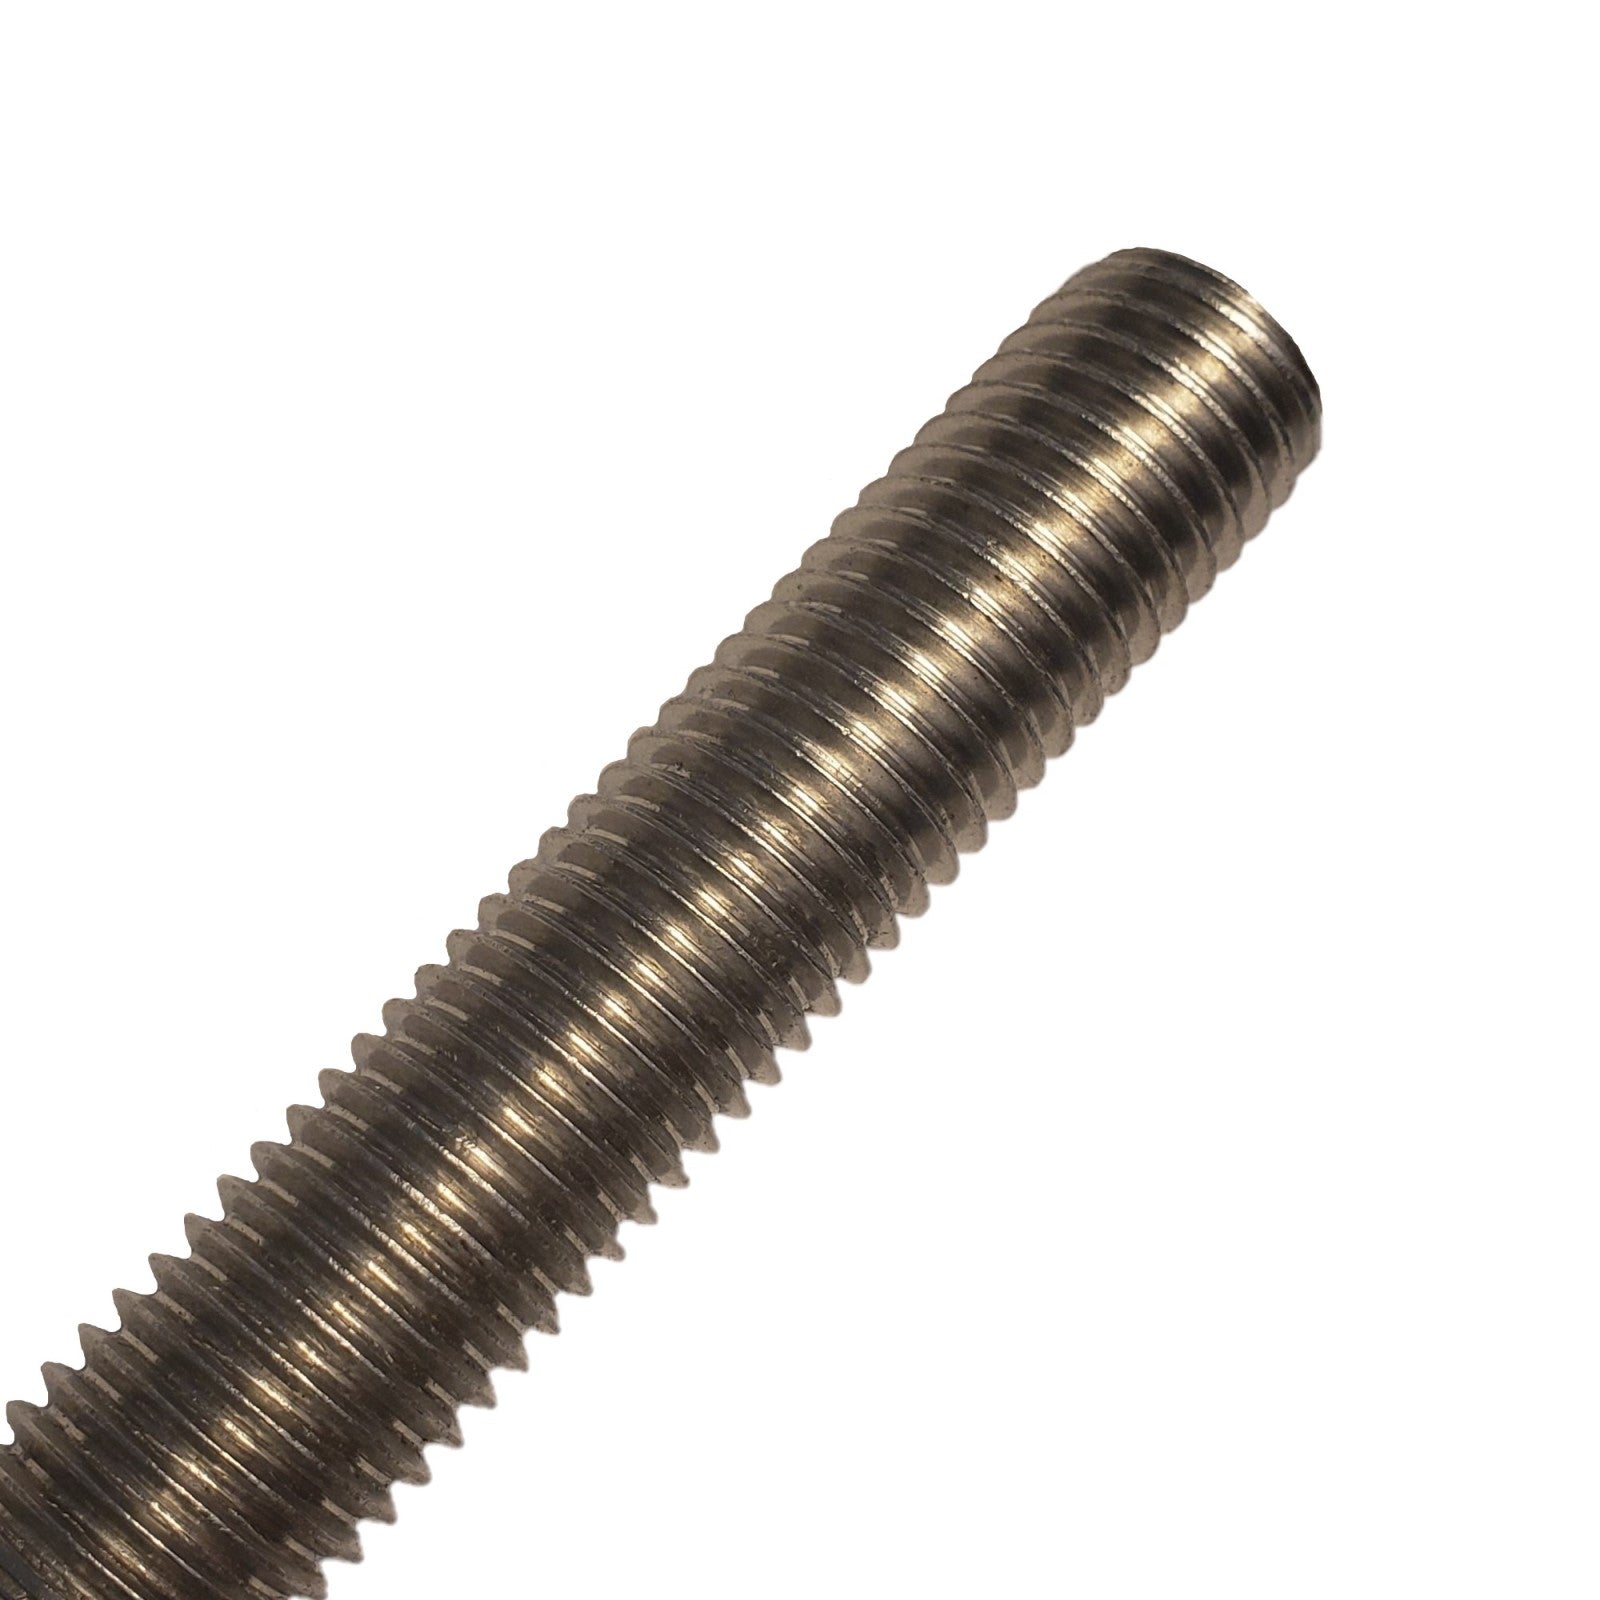 1/2-13 x 1' 316 Stainless Steel Threaded Rod – Fasteners Plus